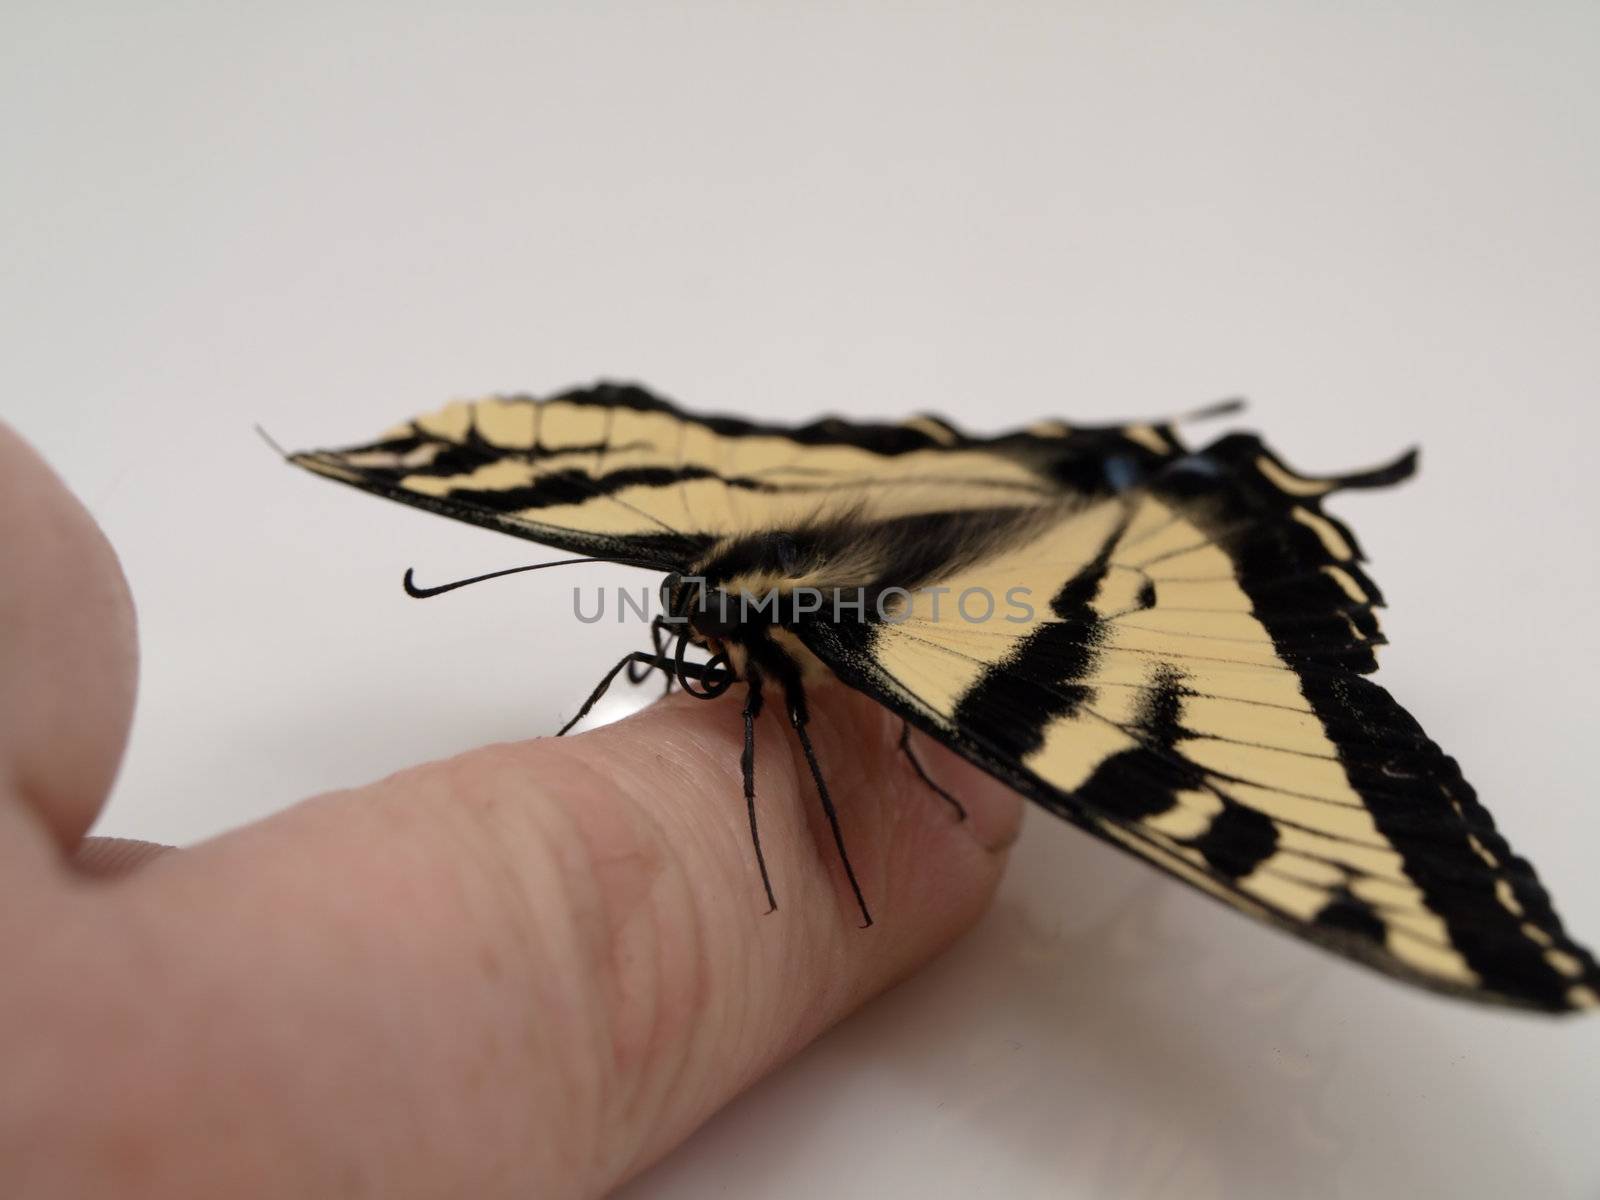 A Swallowtail Butterfly resting on a finger